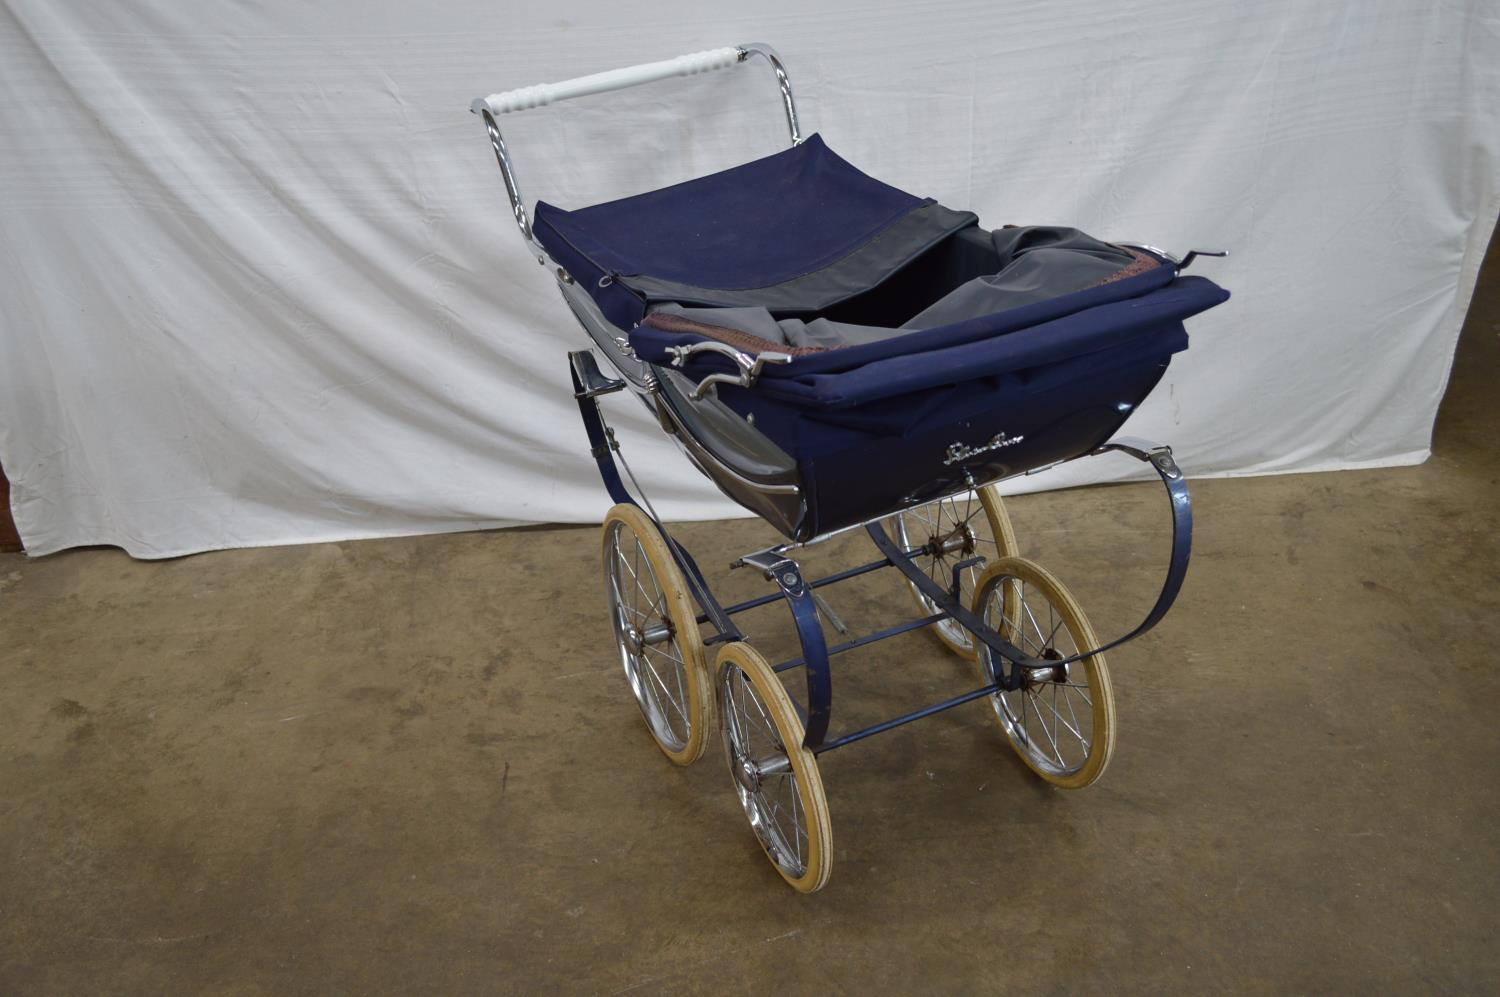 Silver Cross dolls pram in blue livery - 90cm x 77.5cm tall Please note descriptions are not - Image 3 of 5